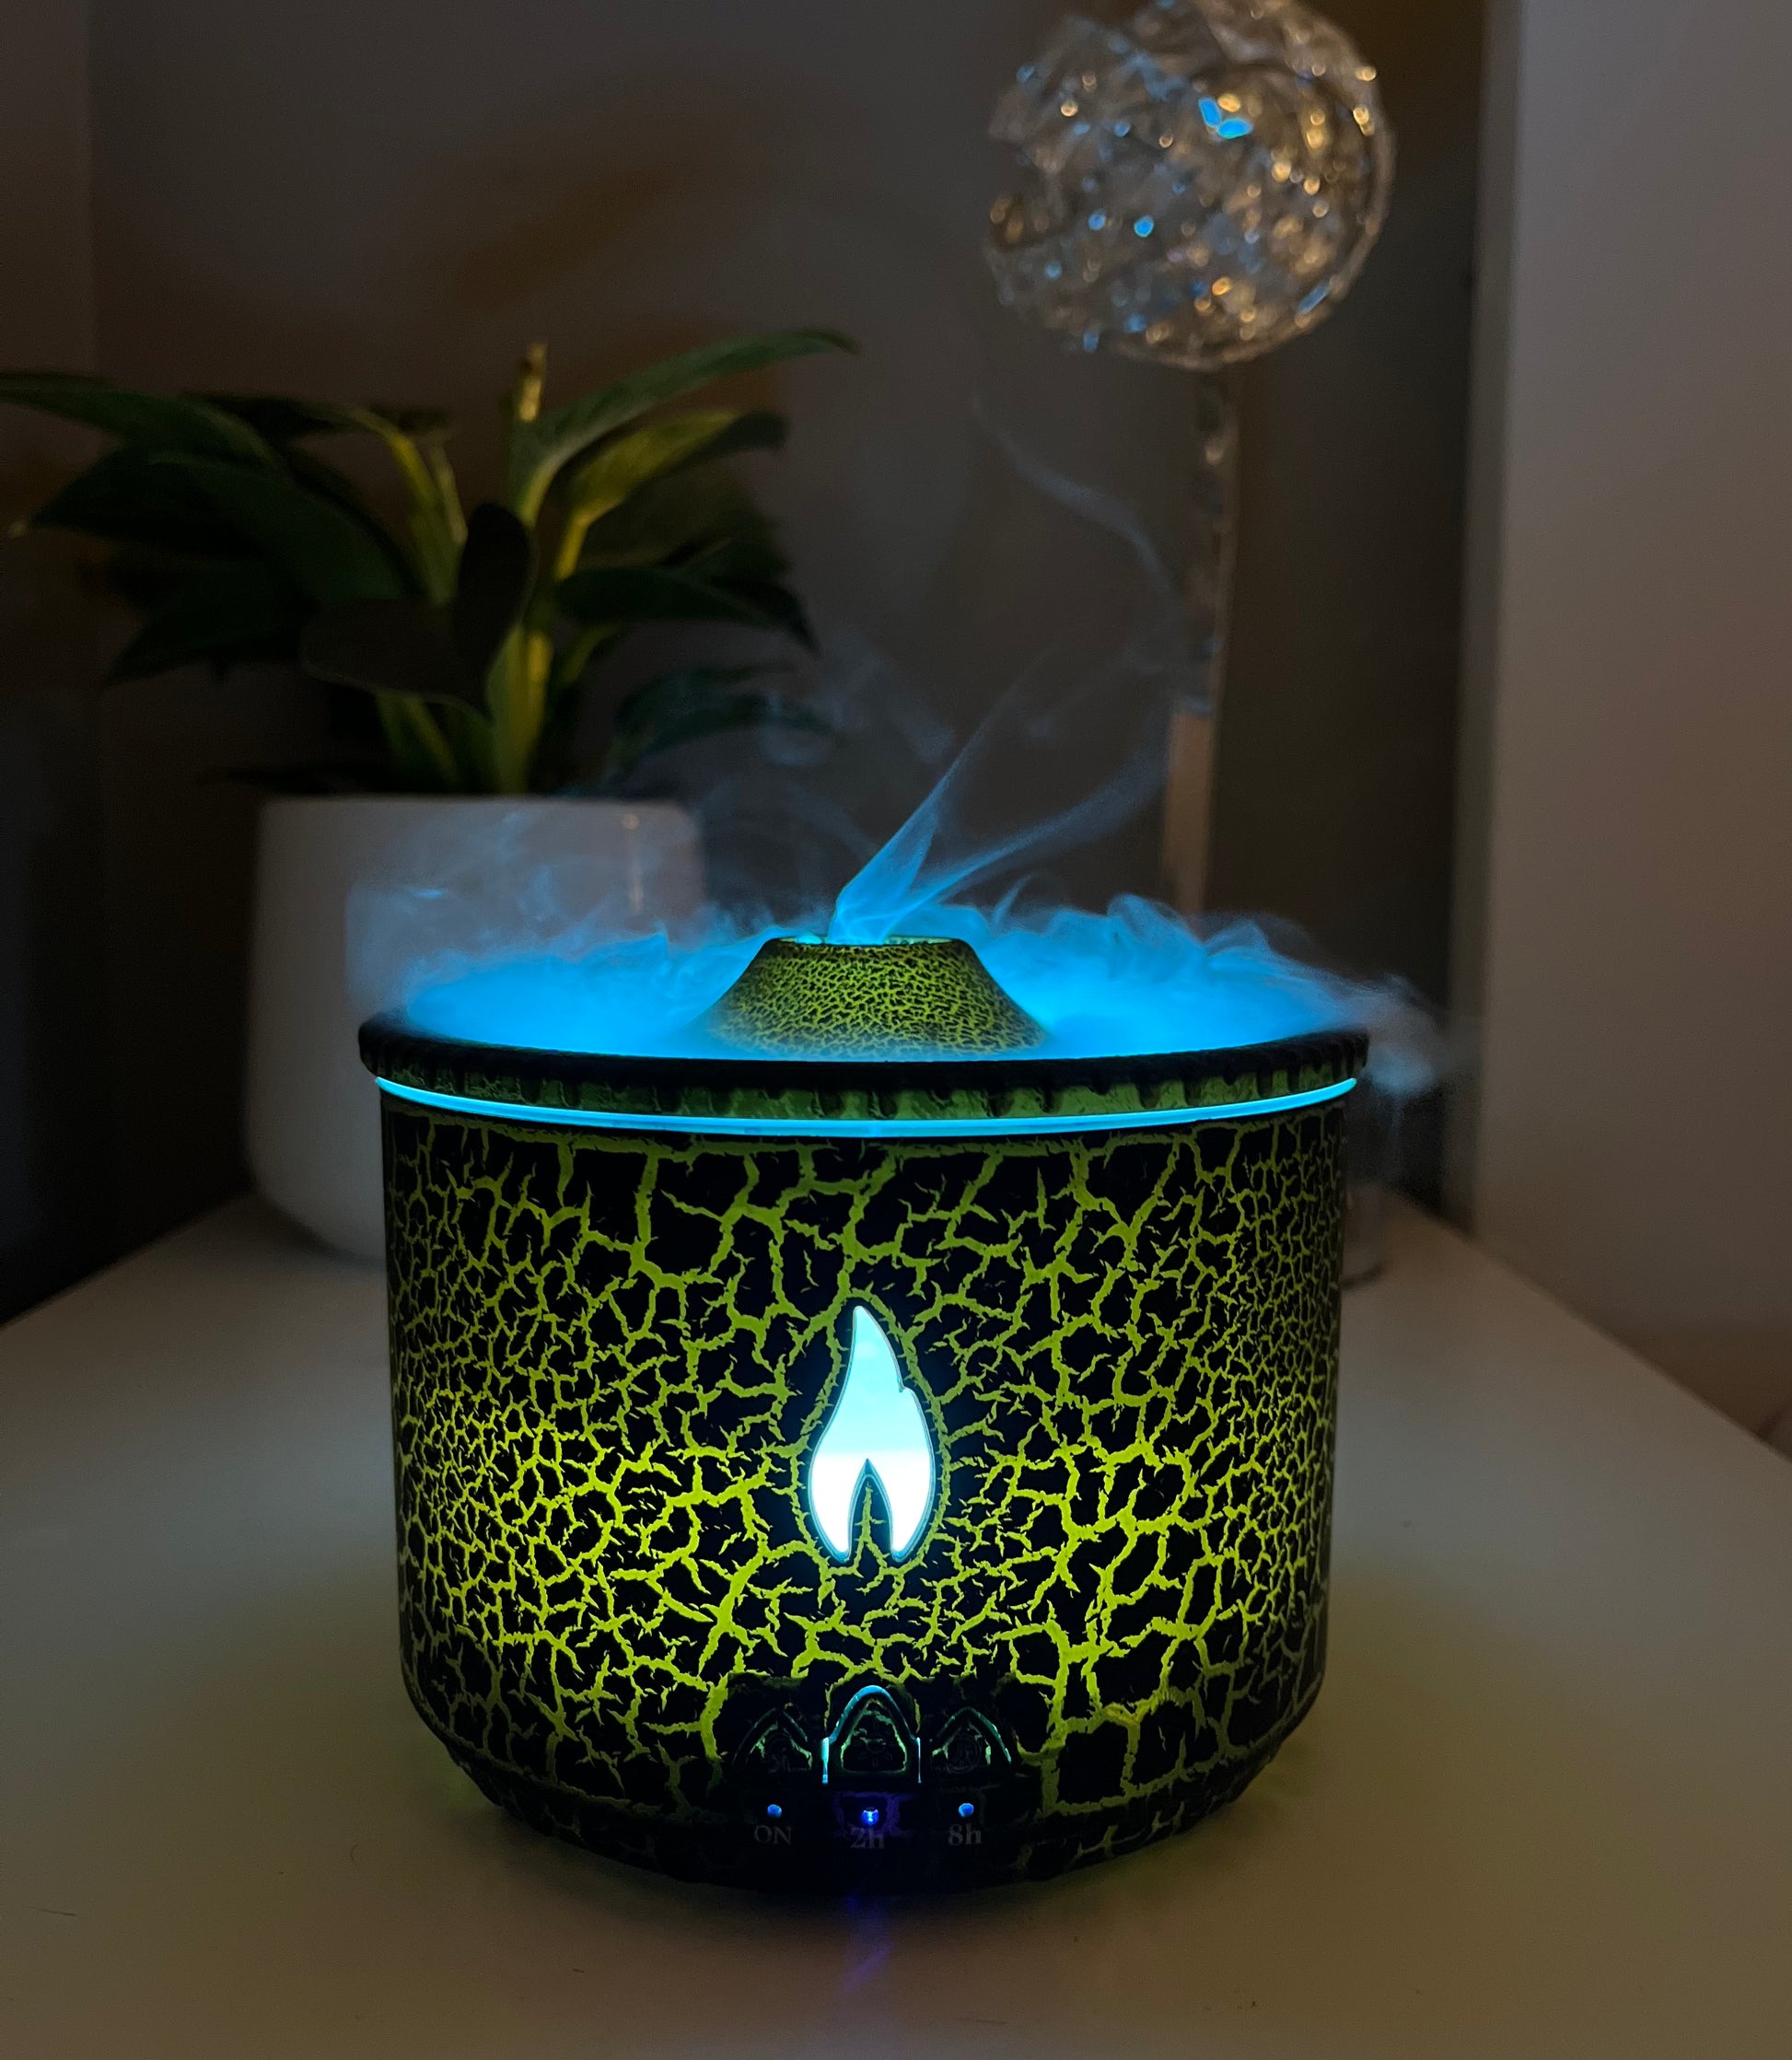 Volcano Humidifier 3.0™ – Your Space